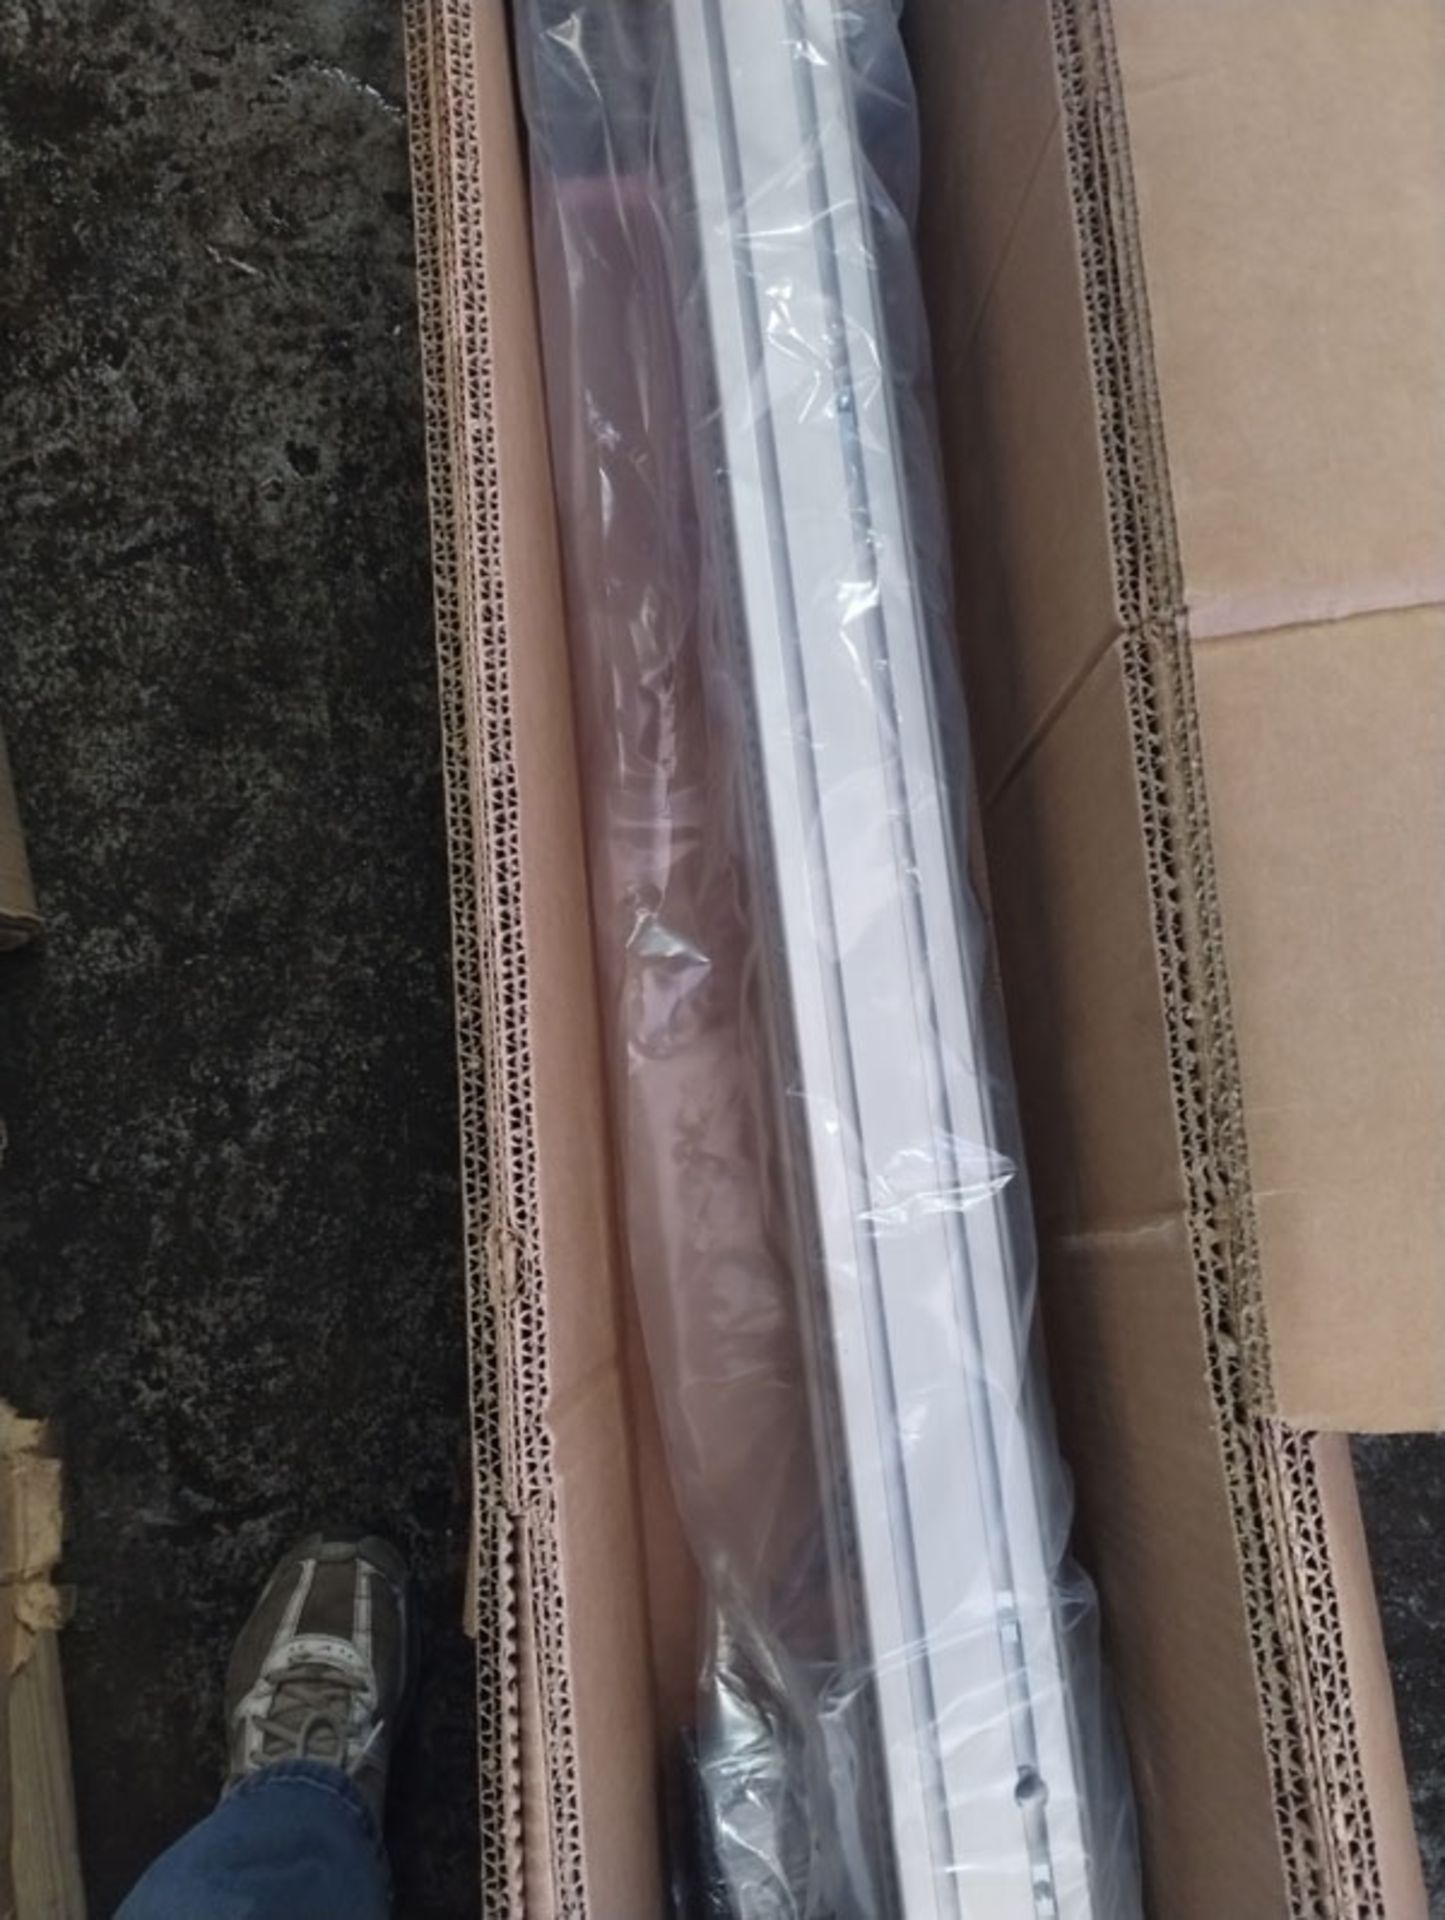 147" LINEAR ACTUATOR PART# 11237B01 --- Lot located at second location: 6800 Union ave. , Cleveland - Image 3 of 6